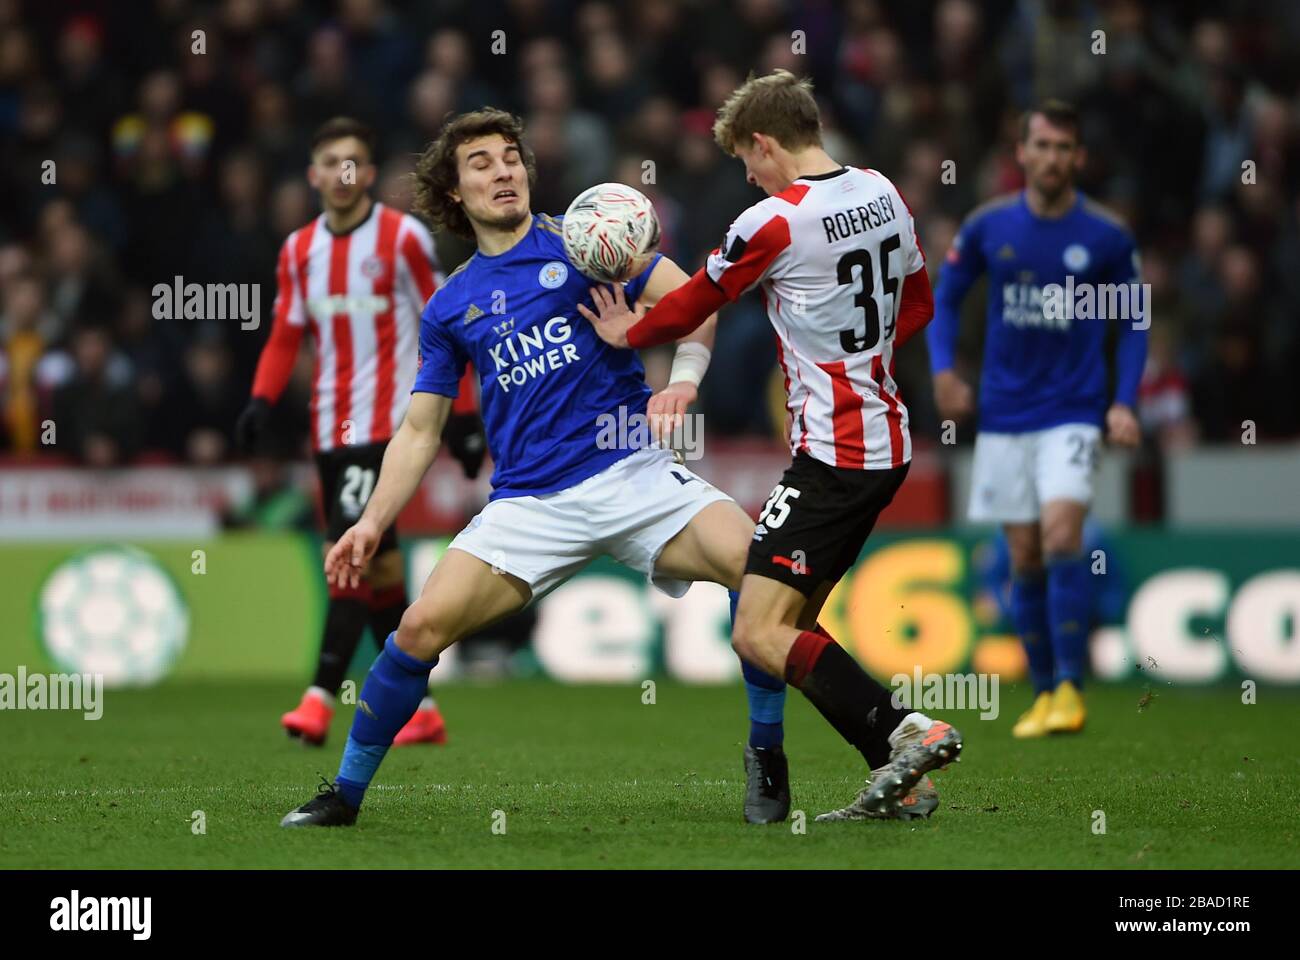 Leicester City's Caglar Soyuncu (left) and Brentford's Mads Roerslev Rasmussen battle for the ball Stock Photo